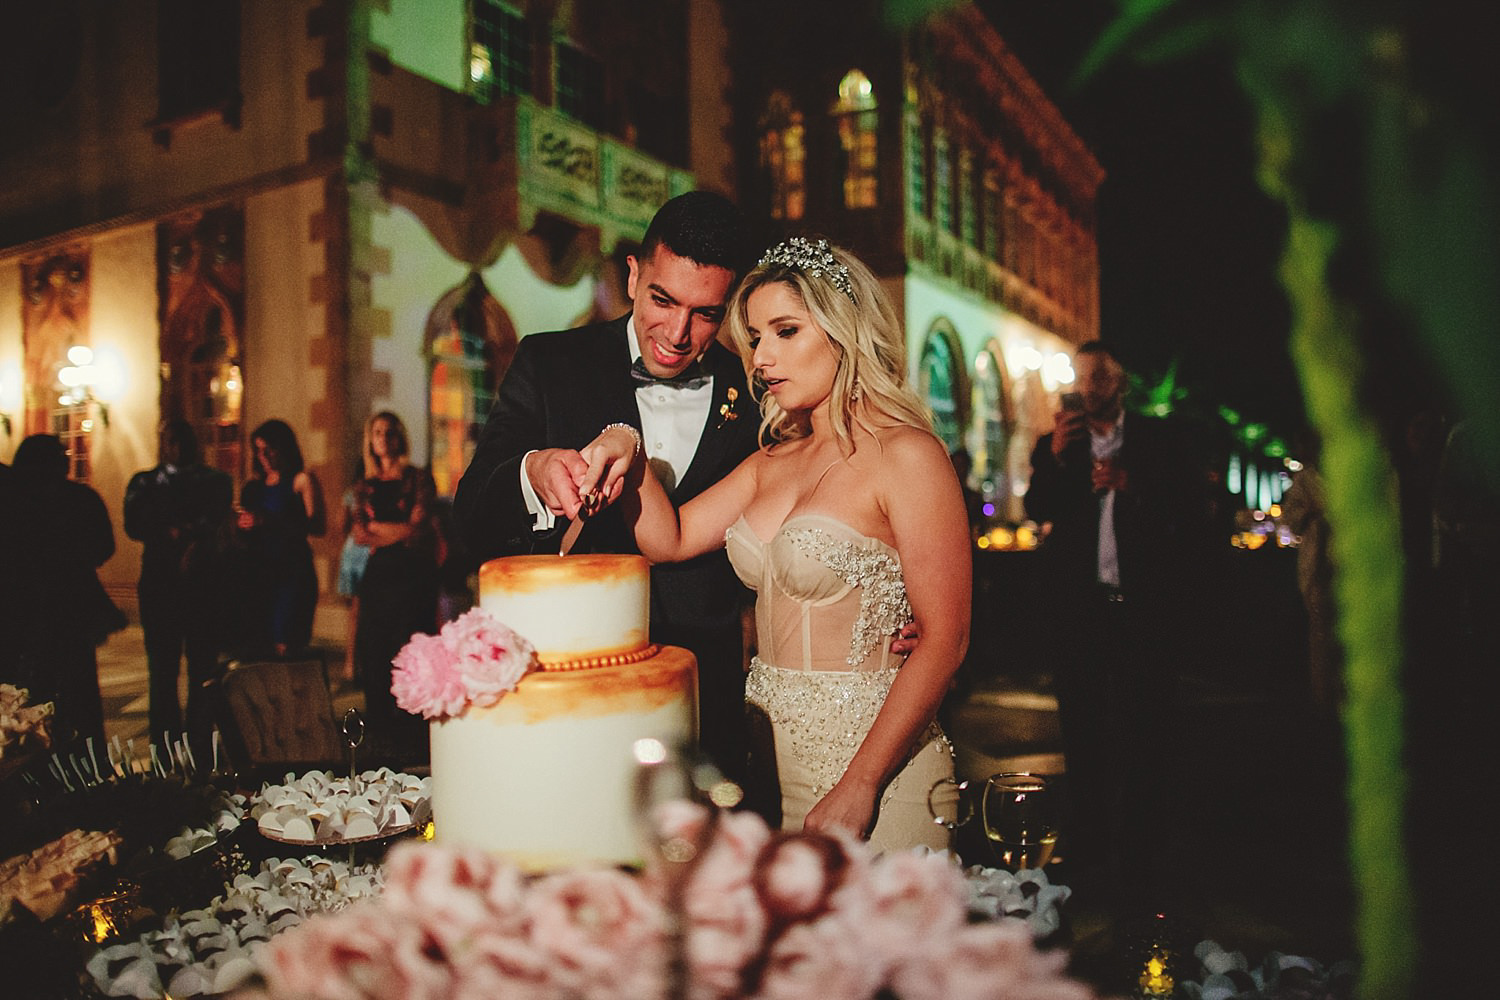 editorial ringling wedding: bride and groom cutting cake